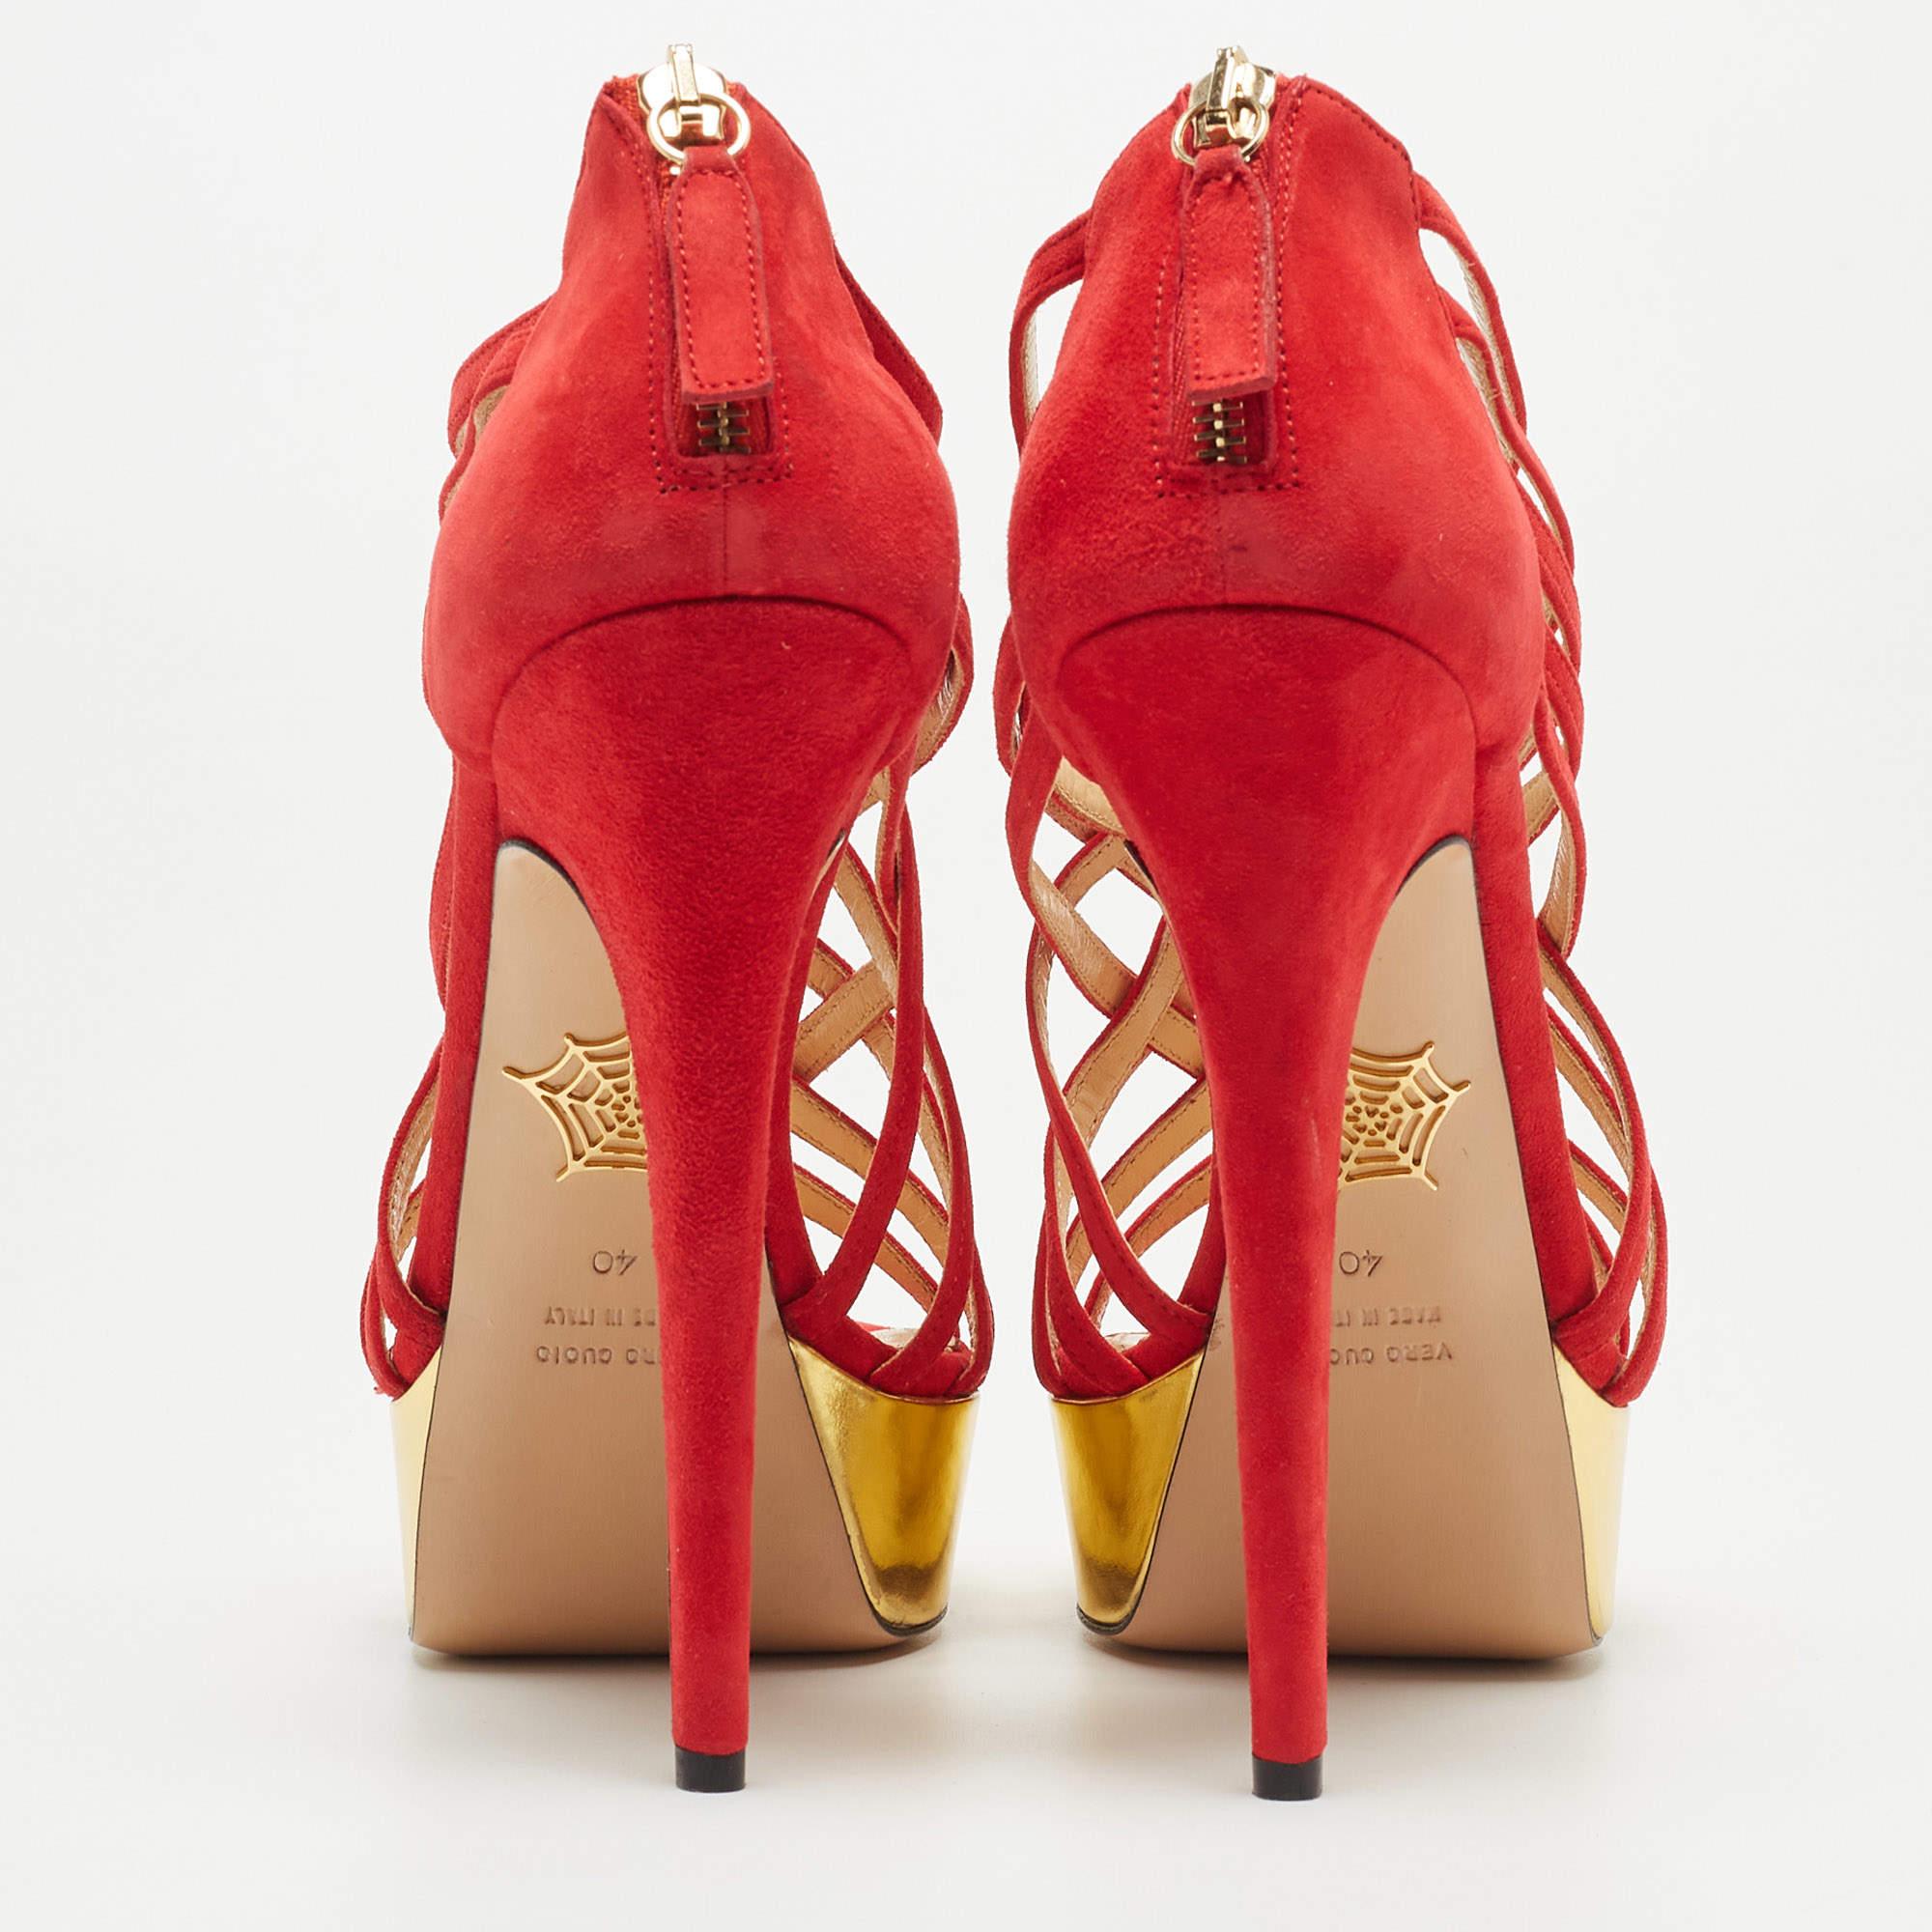 Charlotte Olympia Red Suede Strappy Platform Sandals Size 40 1